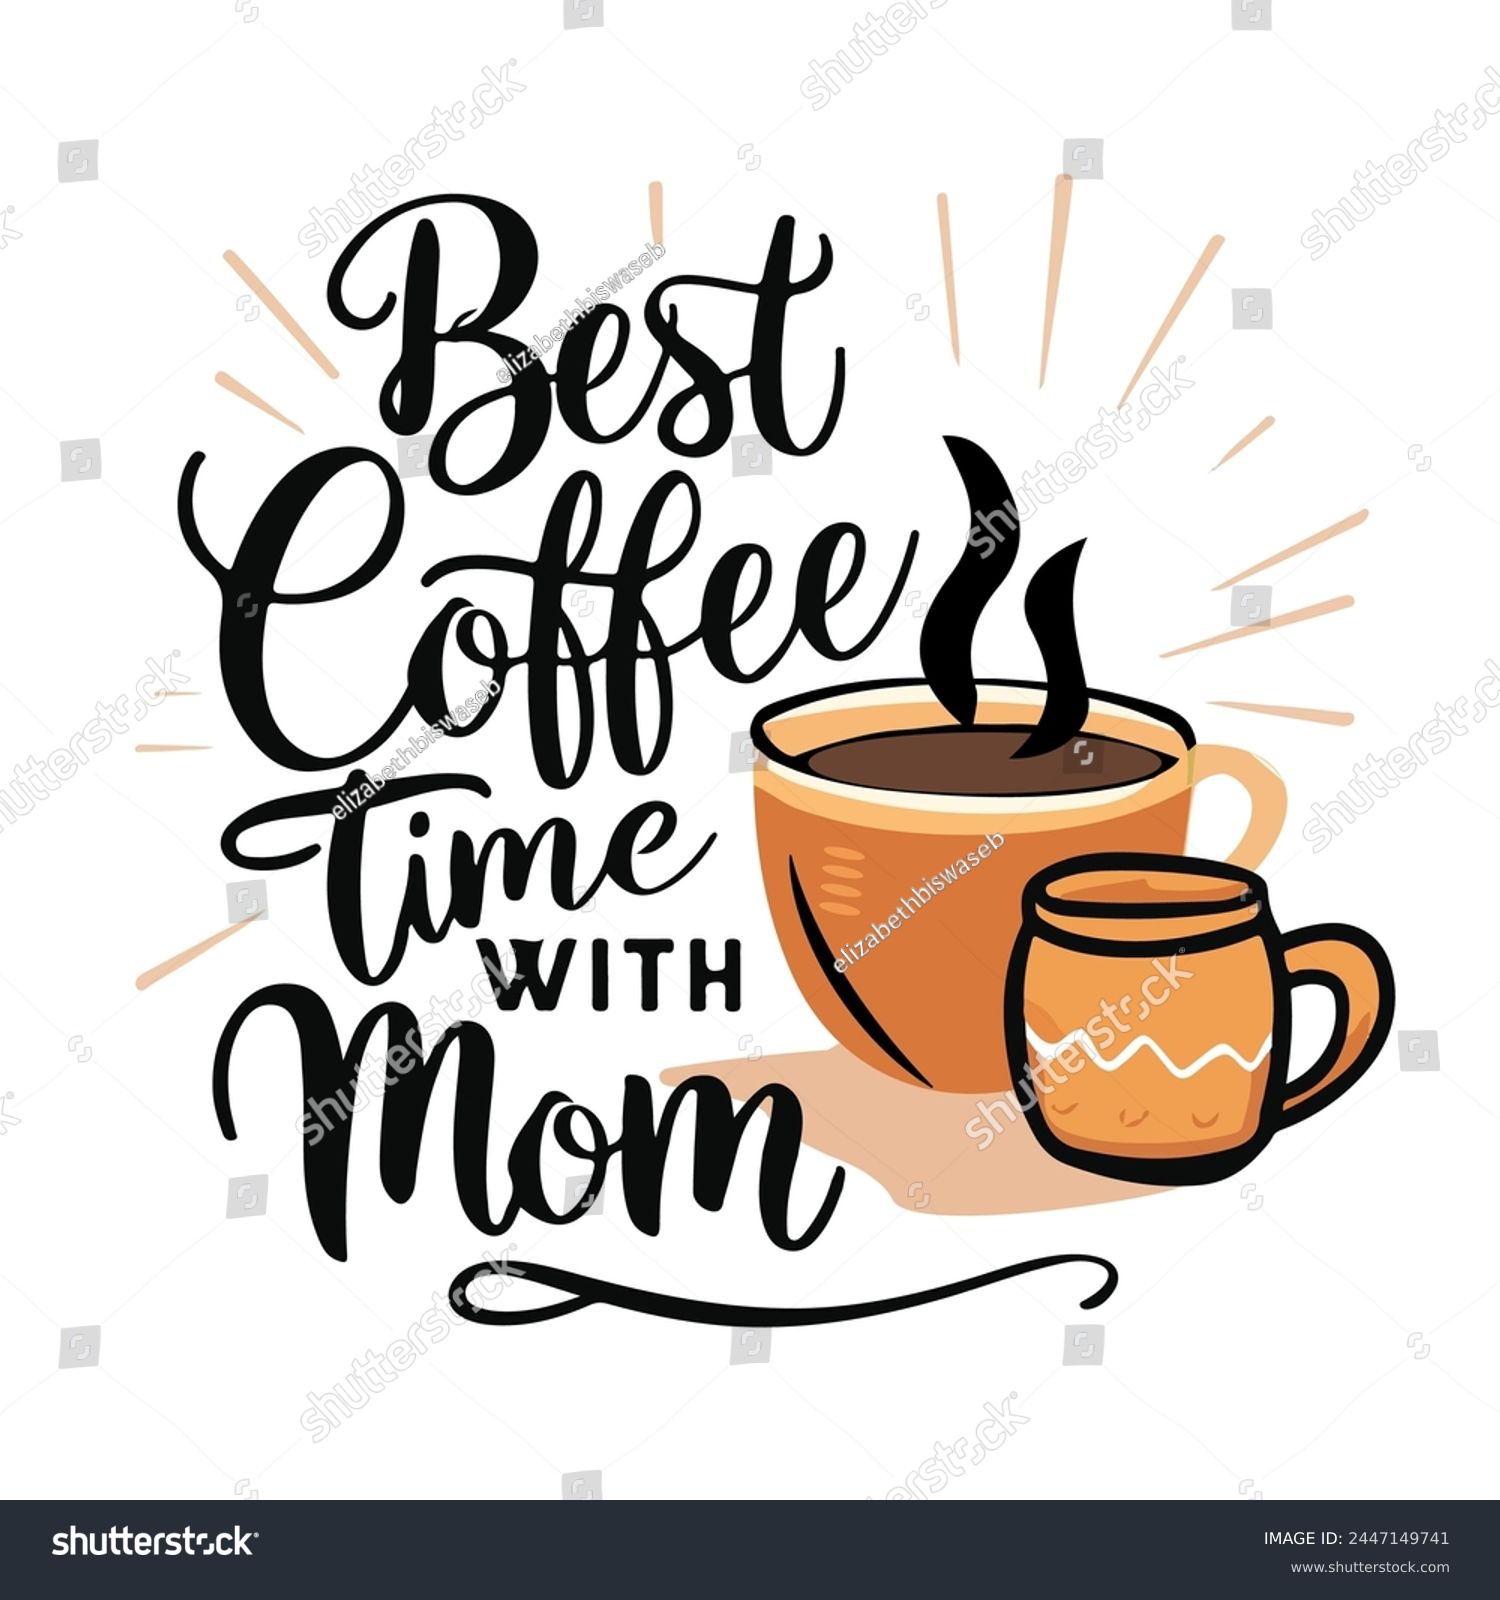 SVG of Best coffee time with mom art design svg